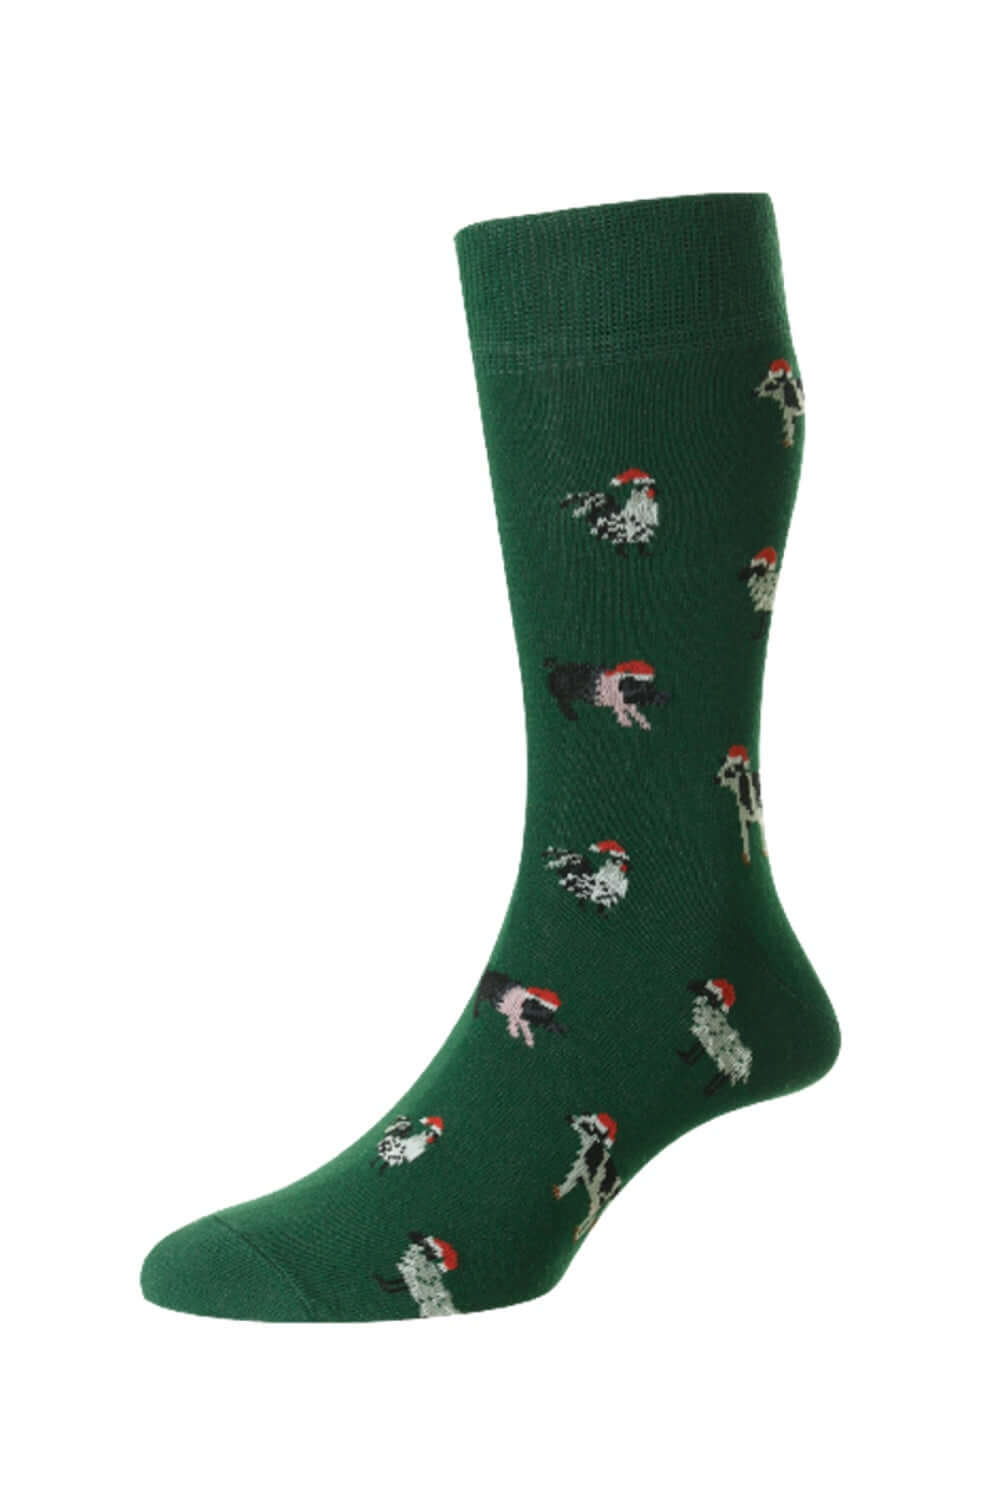 HJ Hall Animals In Christmas Hats Rich Cotton Socks in Forest 